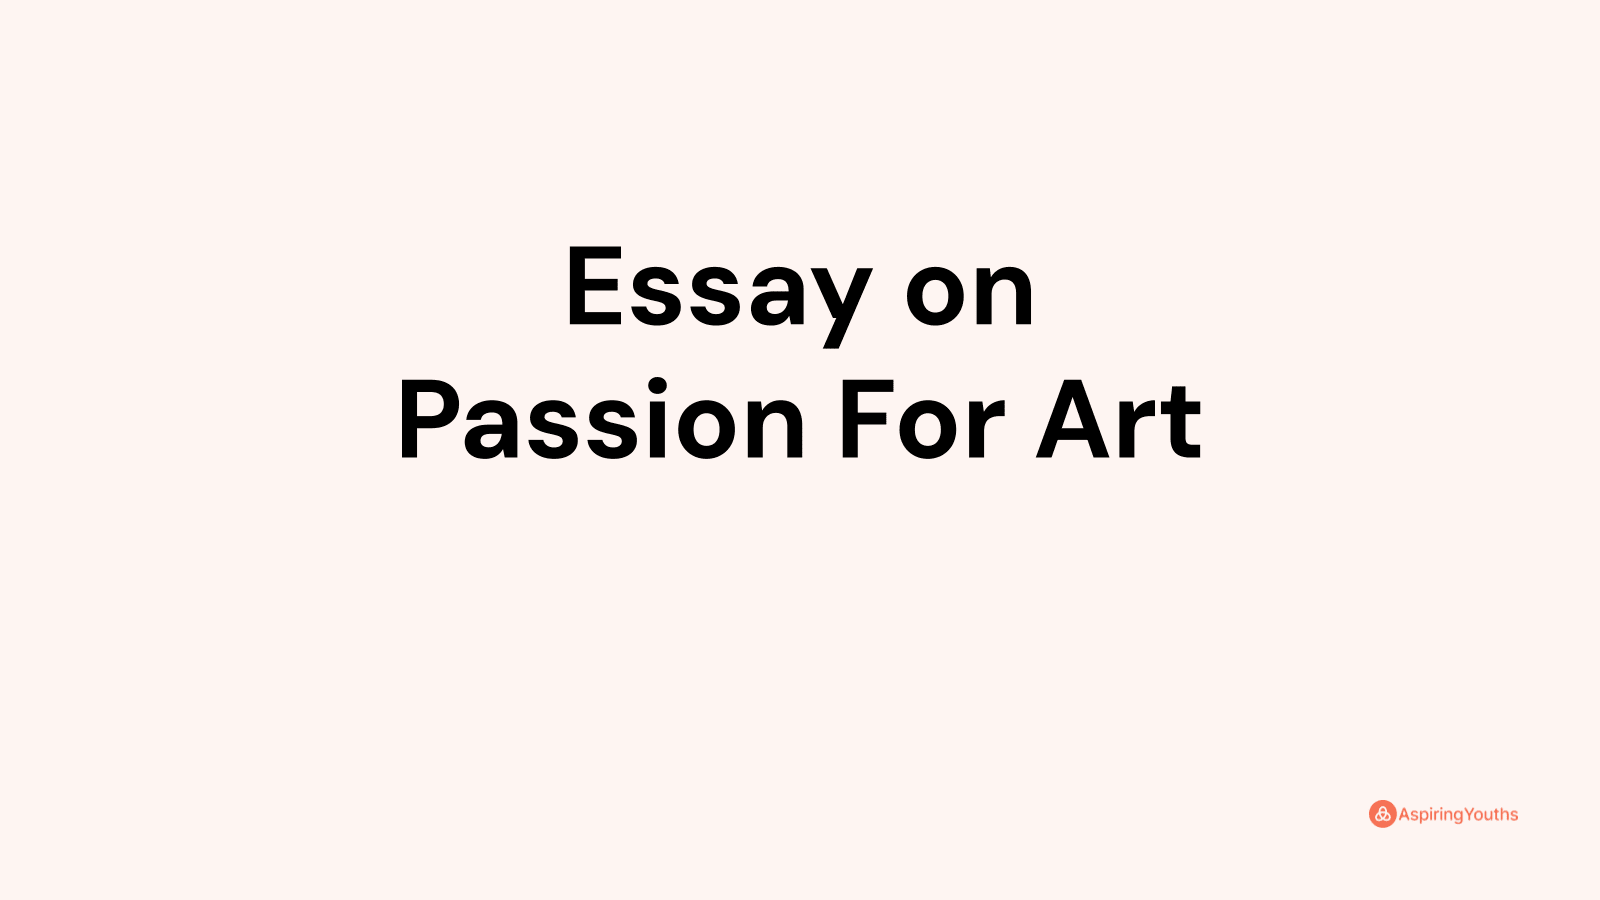 Essay on Passion For Art